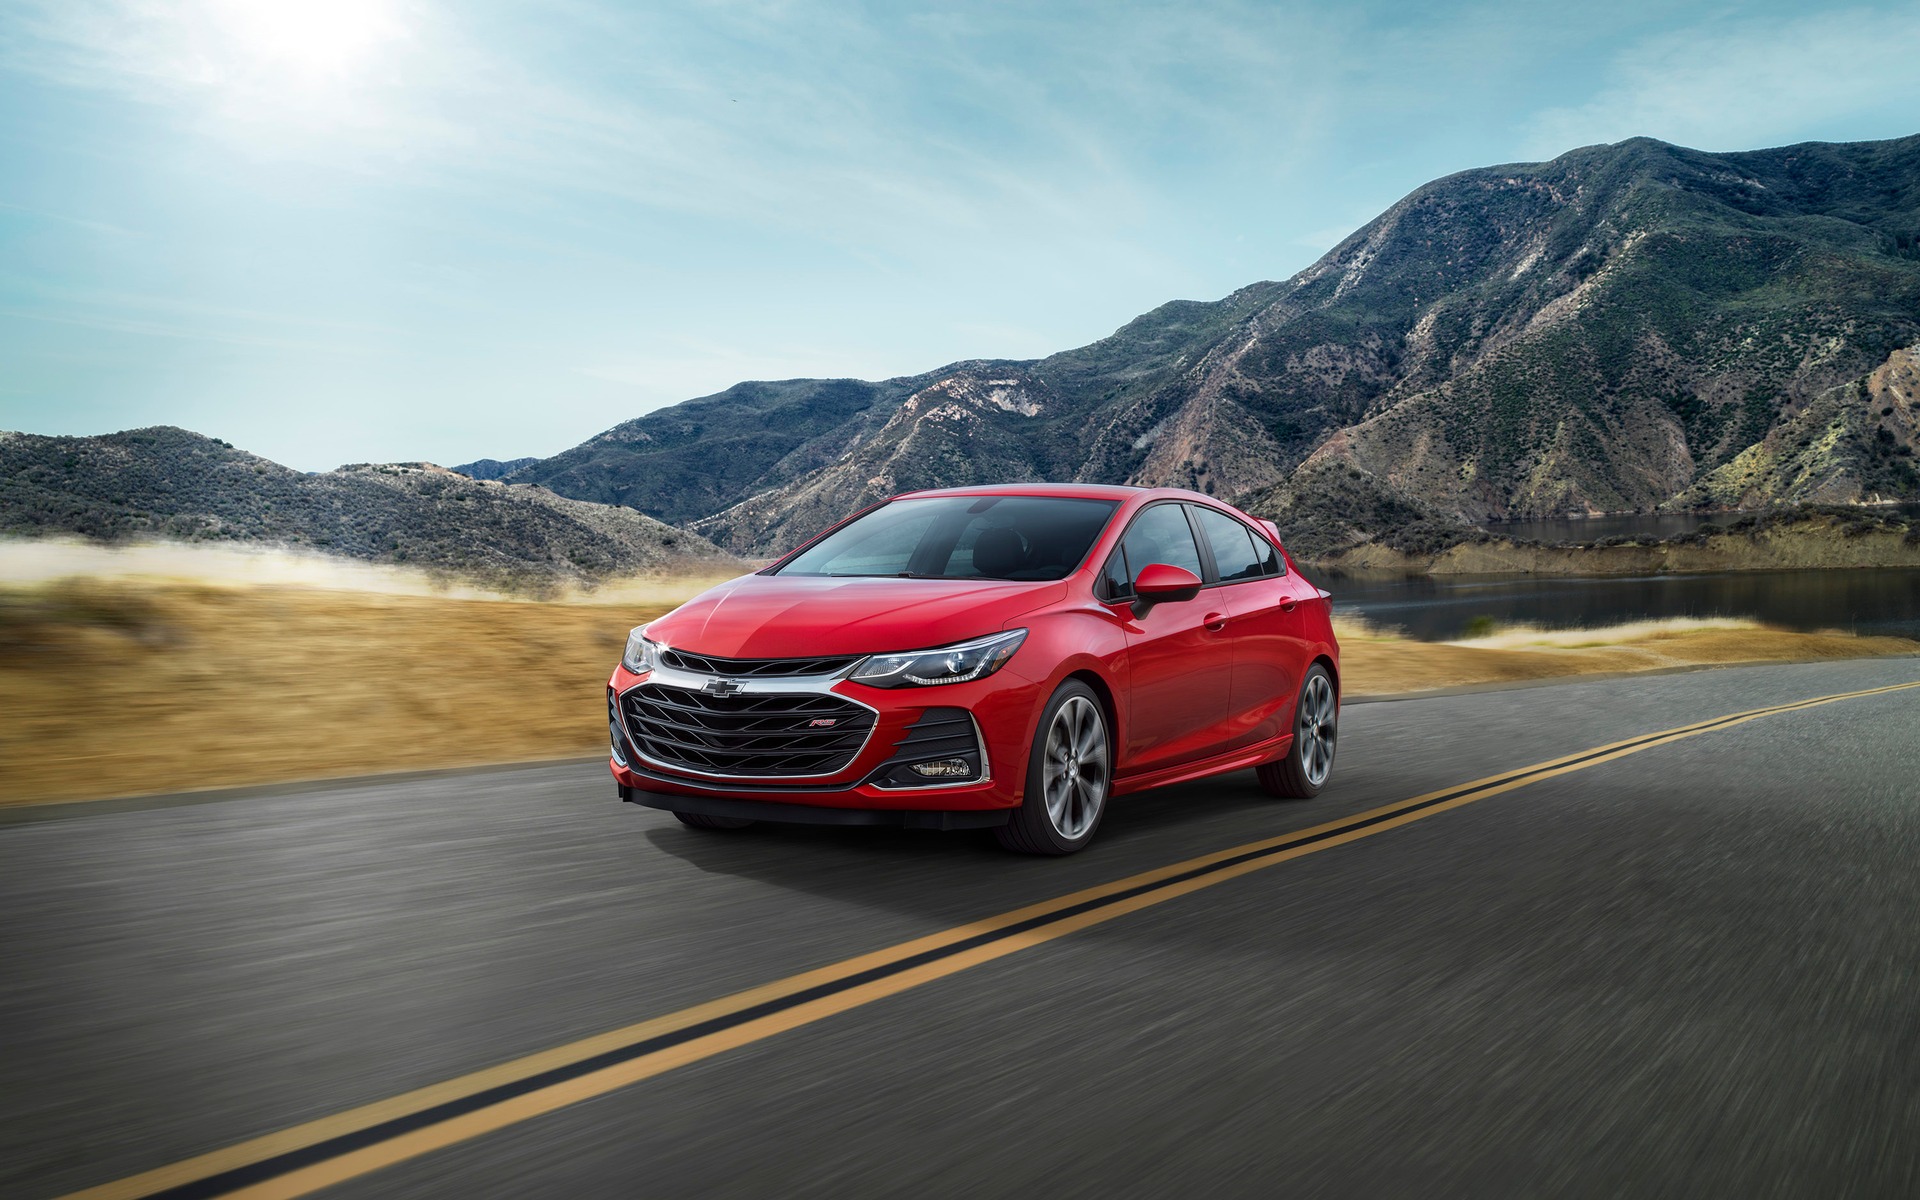 2019 Chevrolet Cruze LS Sedan Price & Specifications - The Car Guide